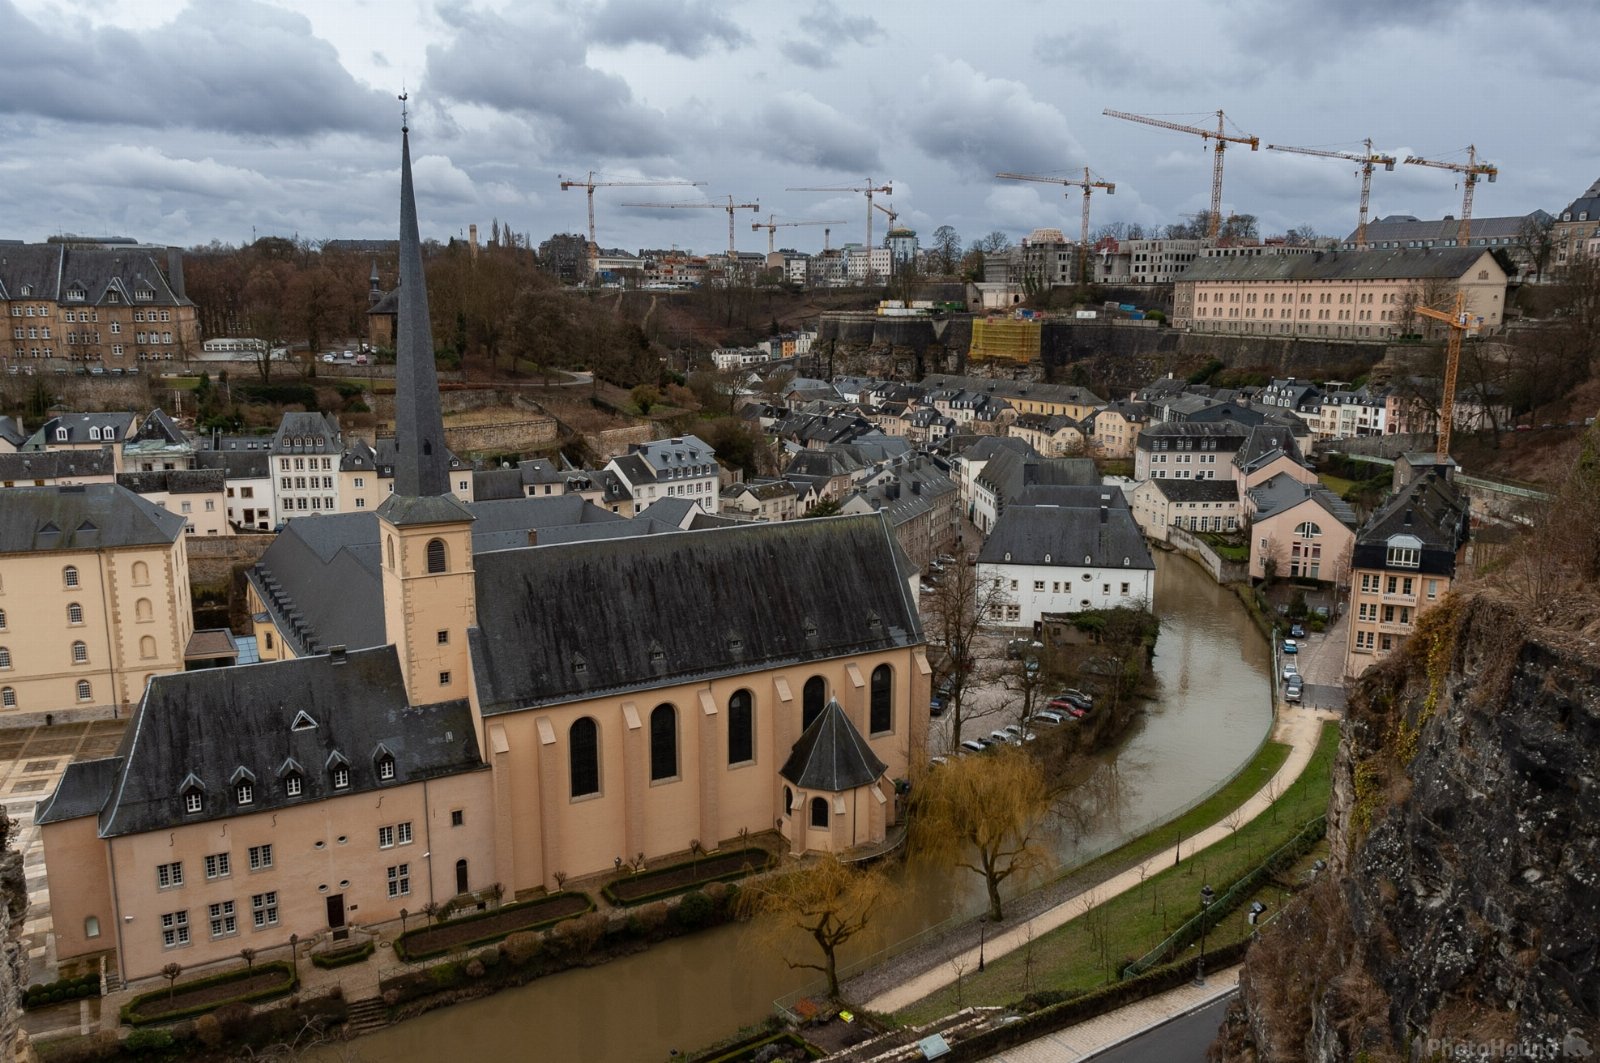 Luxembourg photo locations